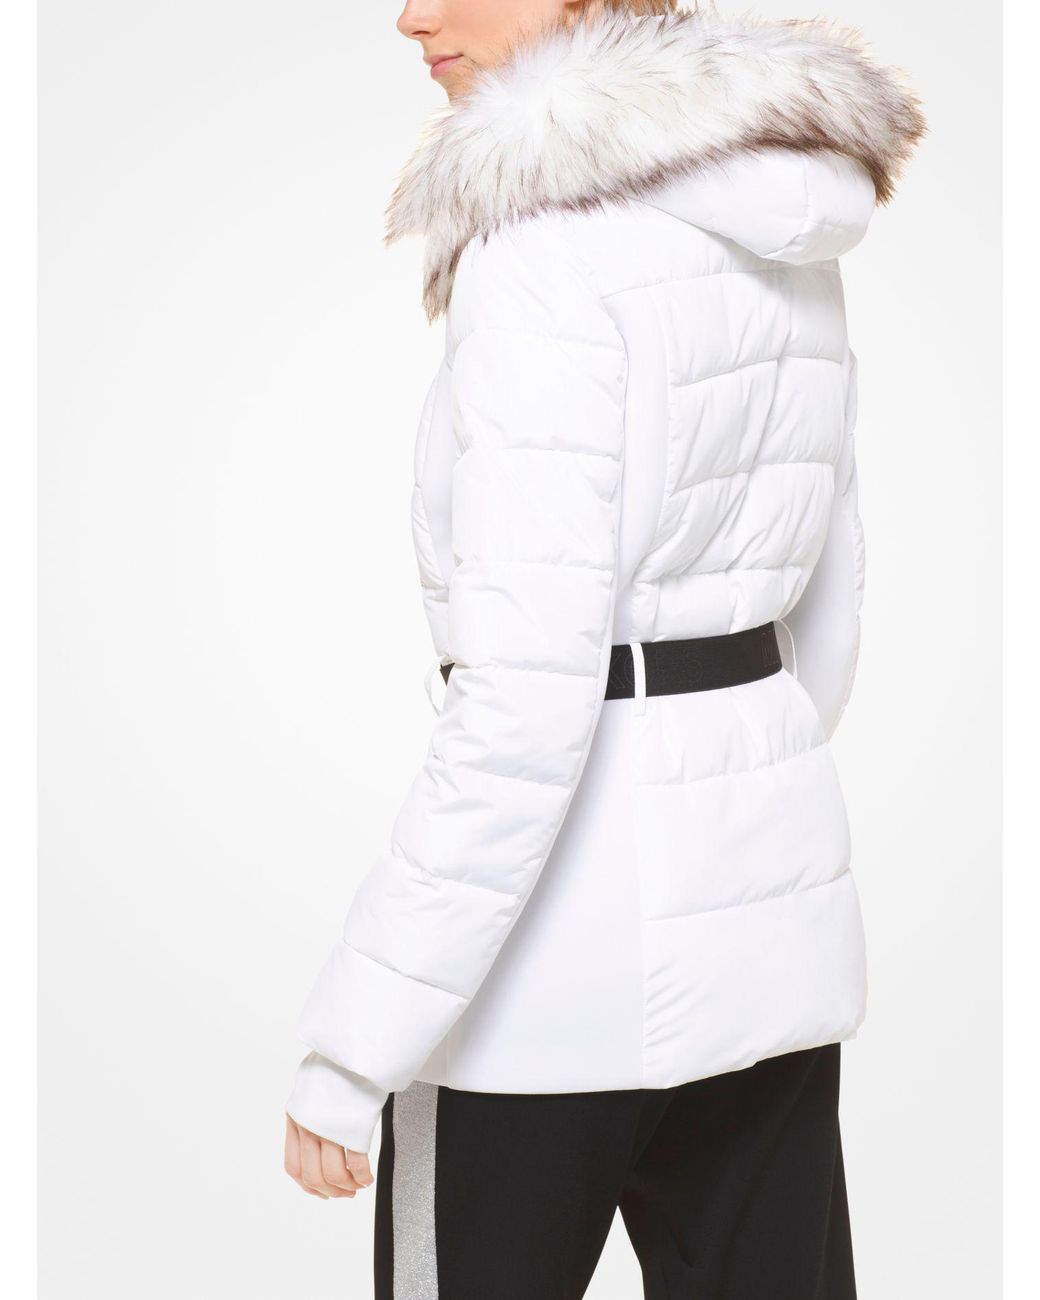 Michael Kors Faux Fur-trimmed Belted Puffer Jacket in White | Lyst